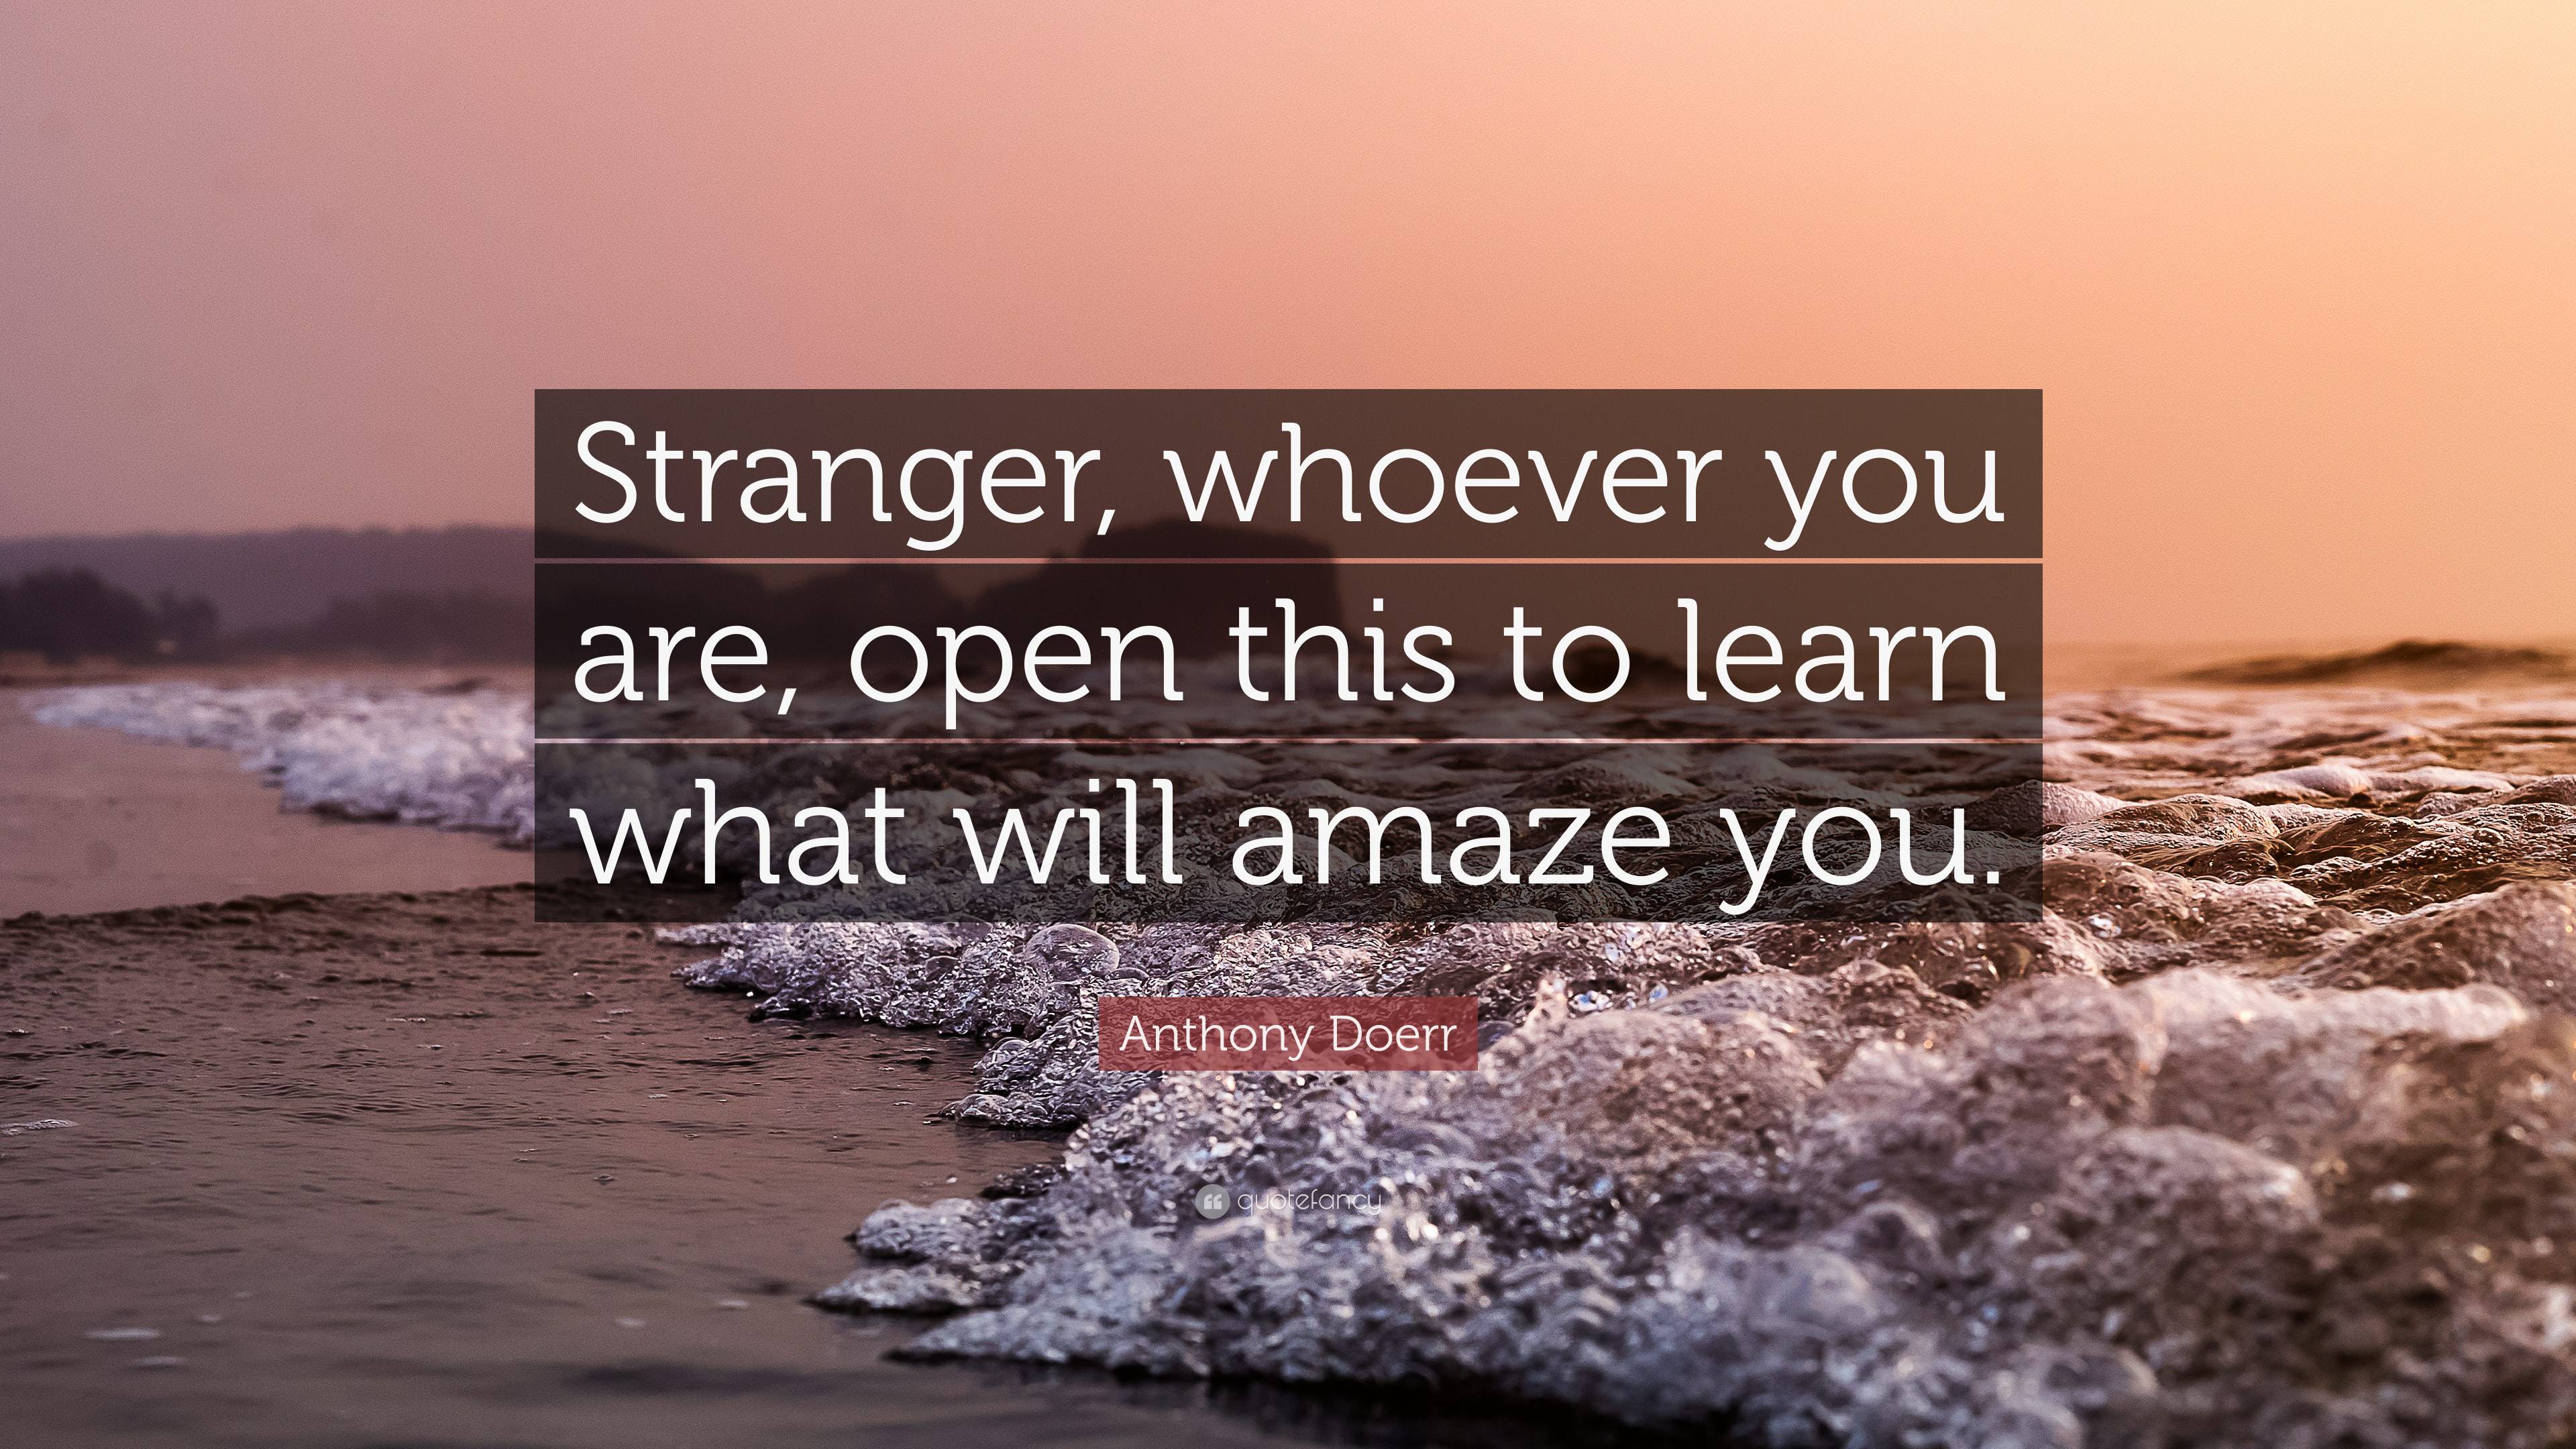 Anthony Doerr Quote “stranger Whoever You Are Open This To Learn What Will Amaze You” 6254